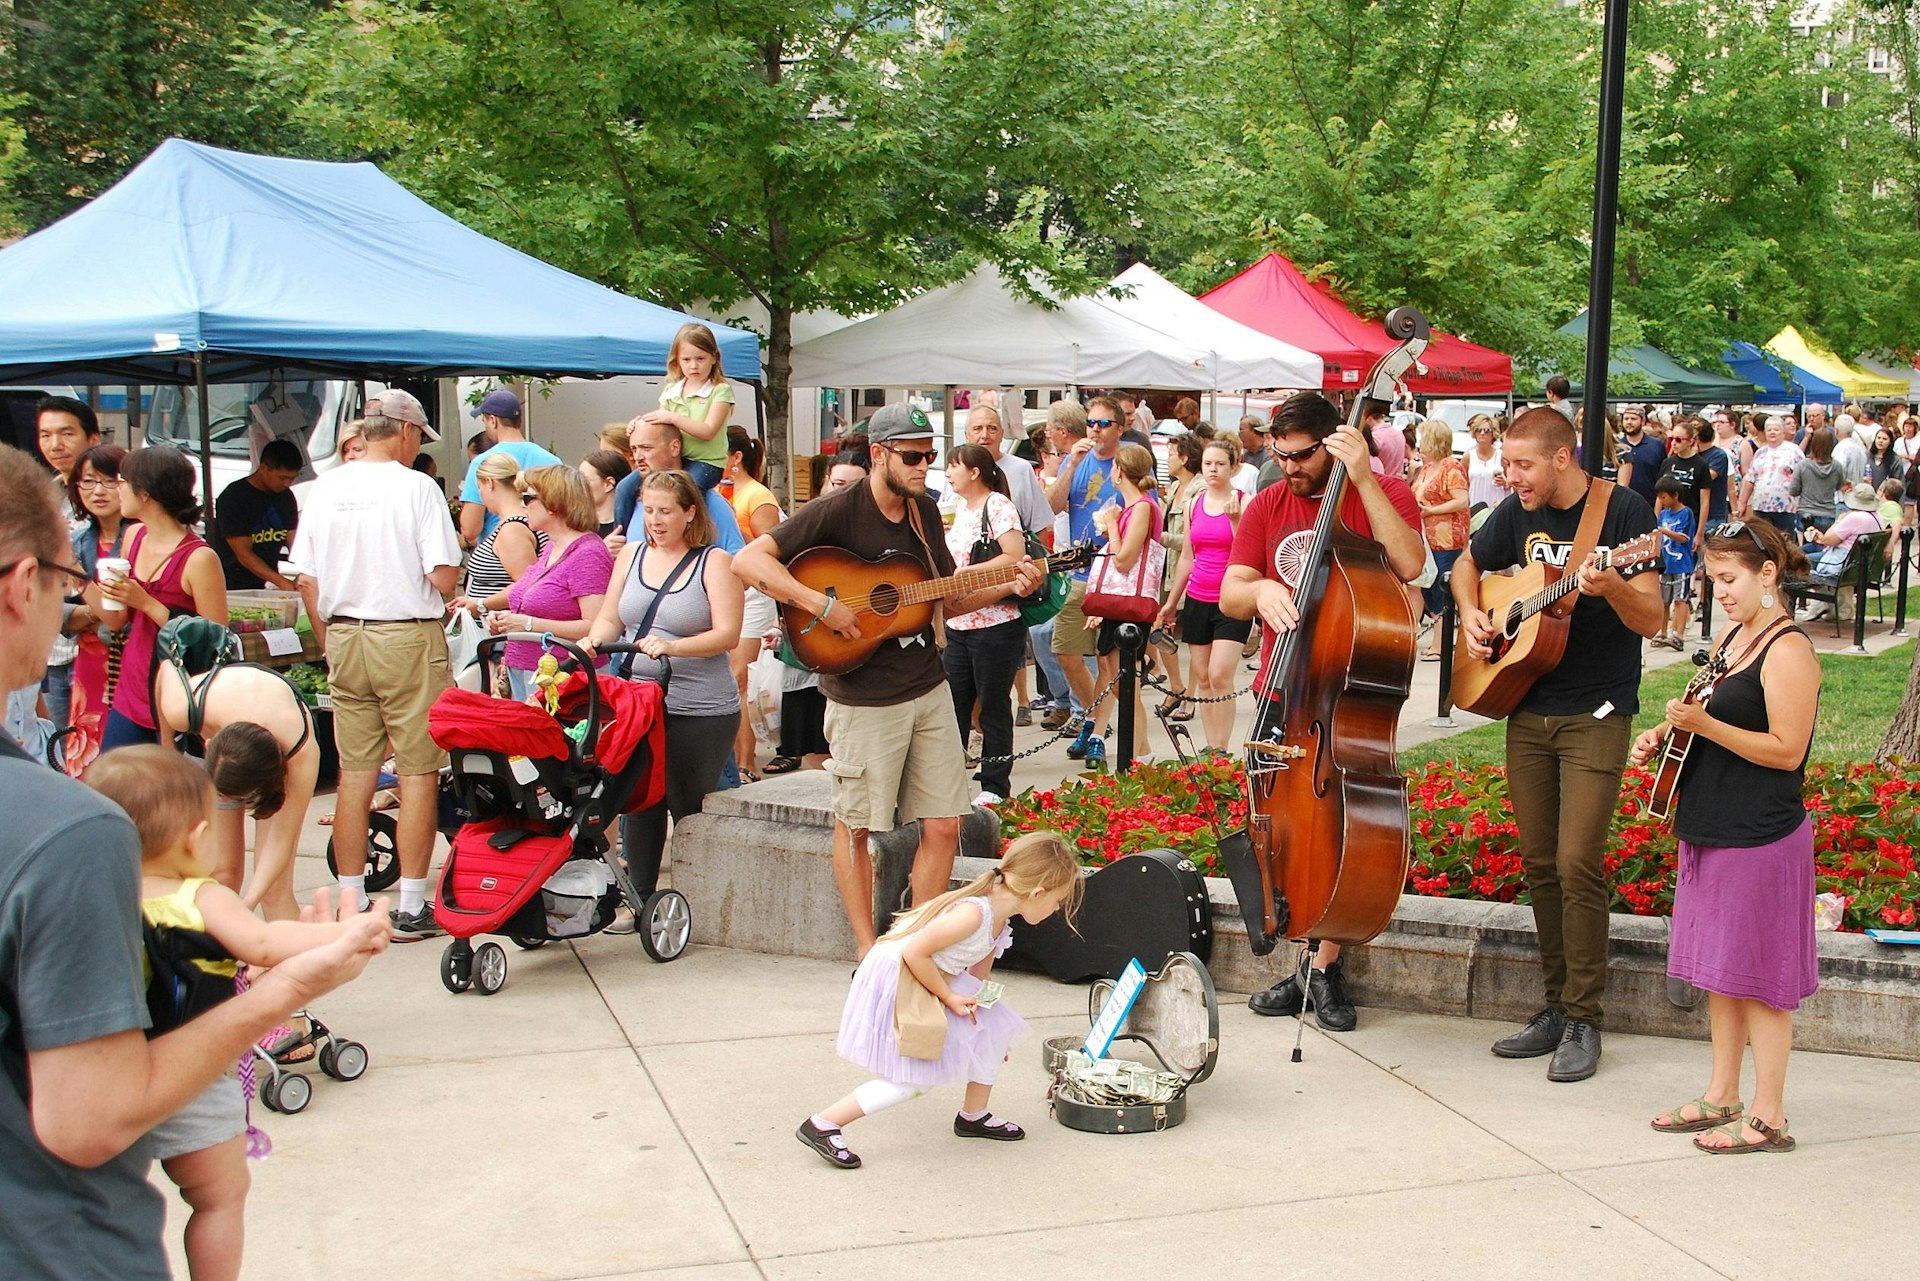 A music act outside the Wisconsin State Capitol building during a regular Saturday Farmer's Market